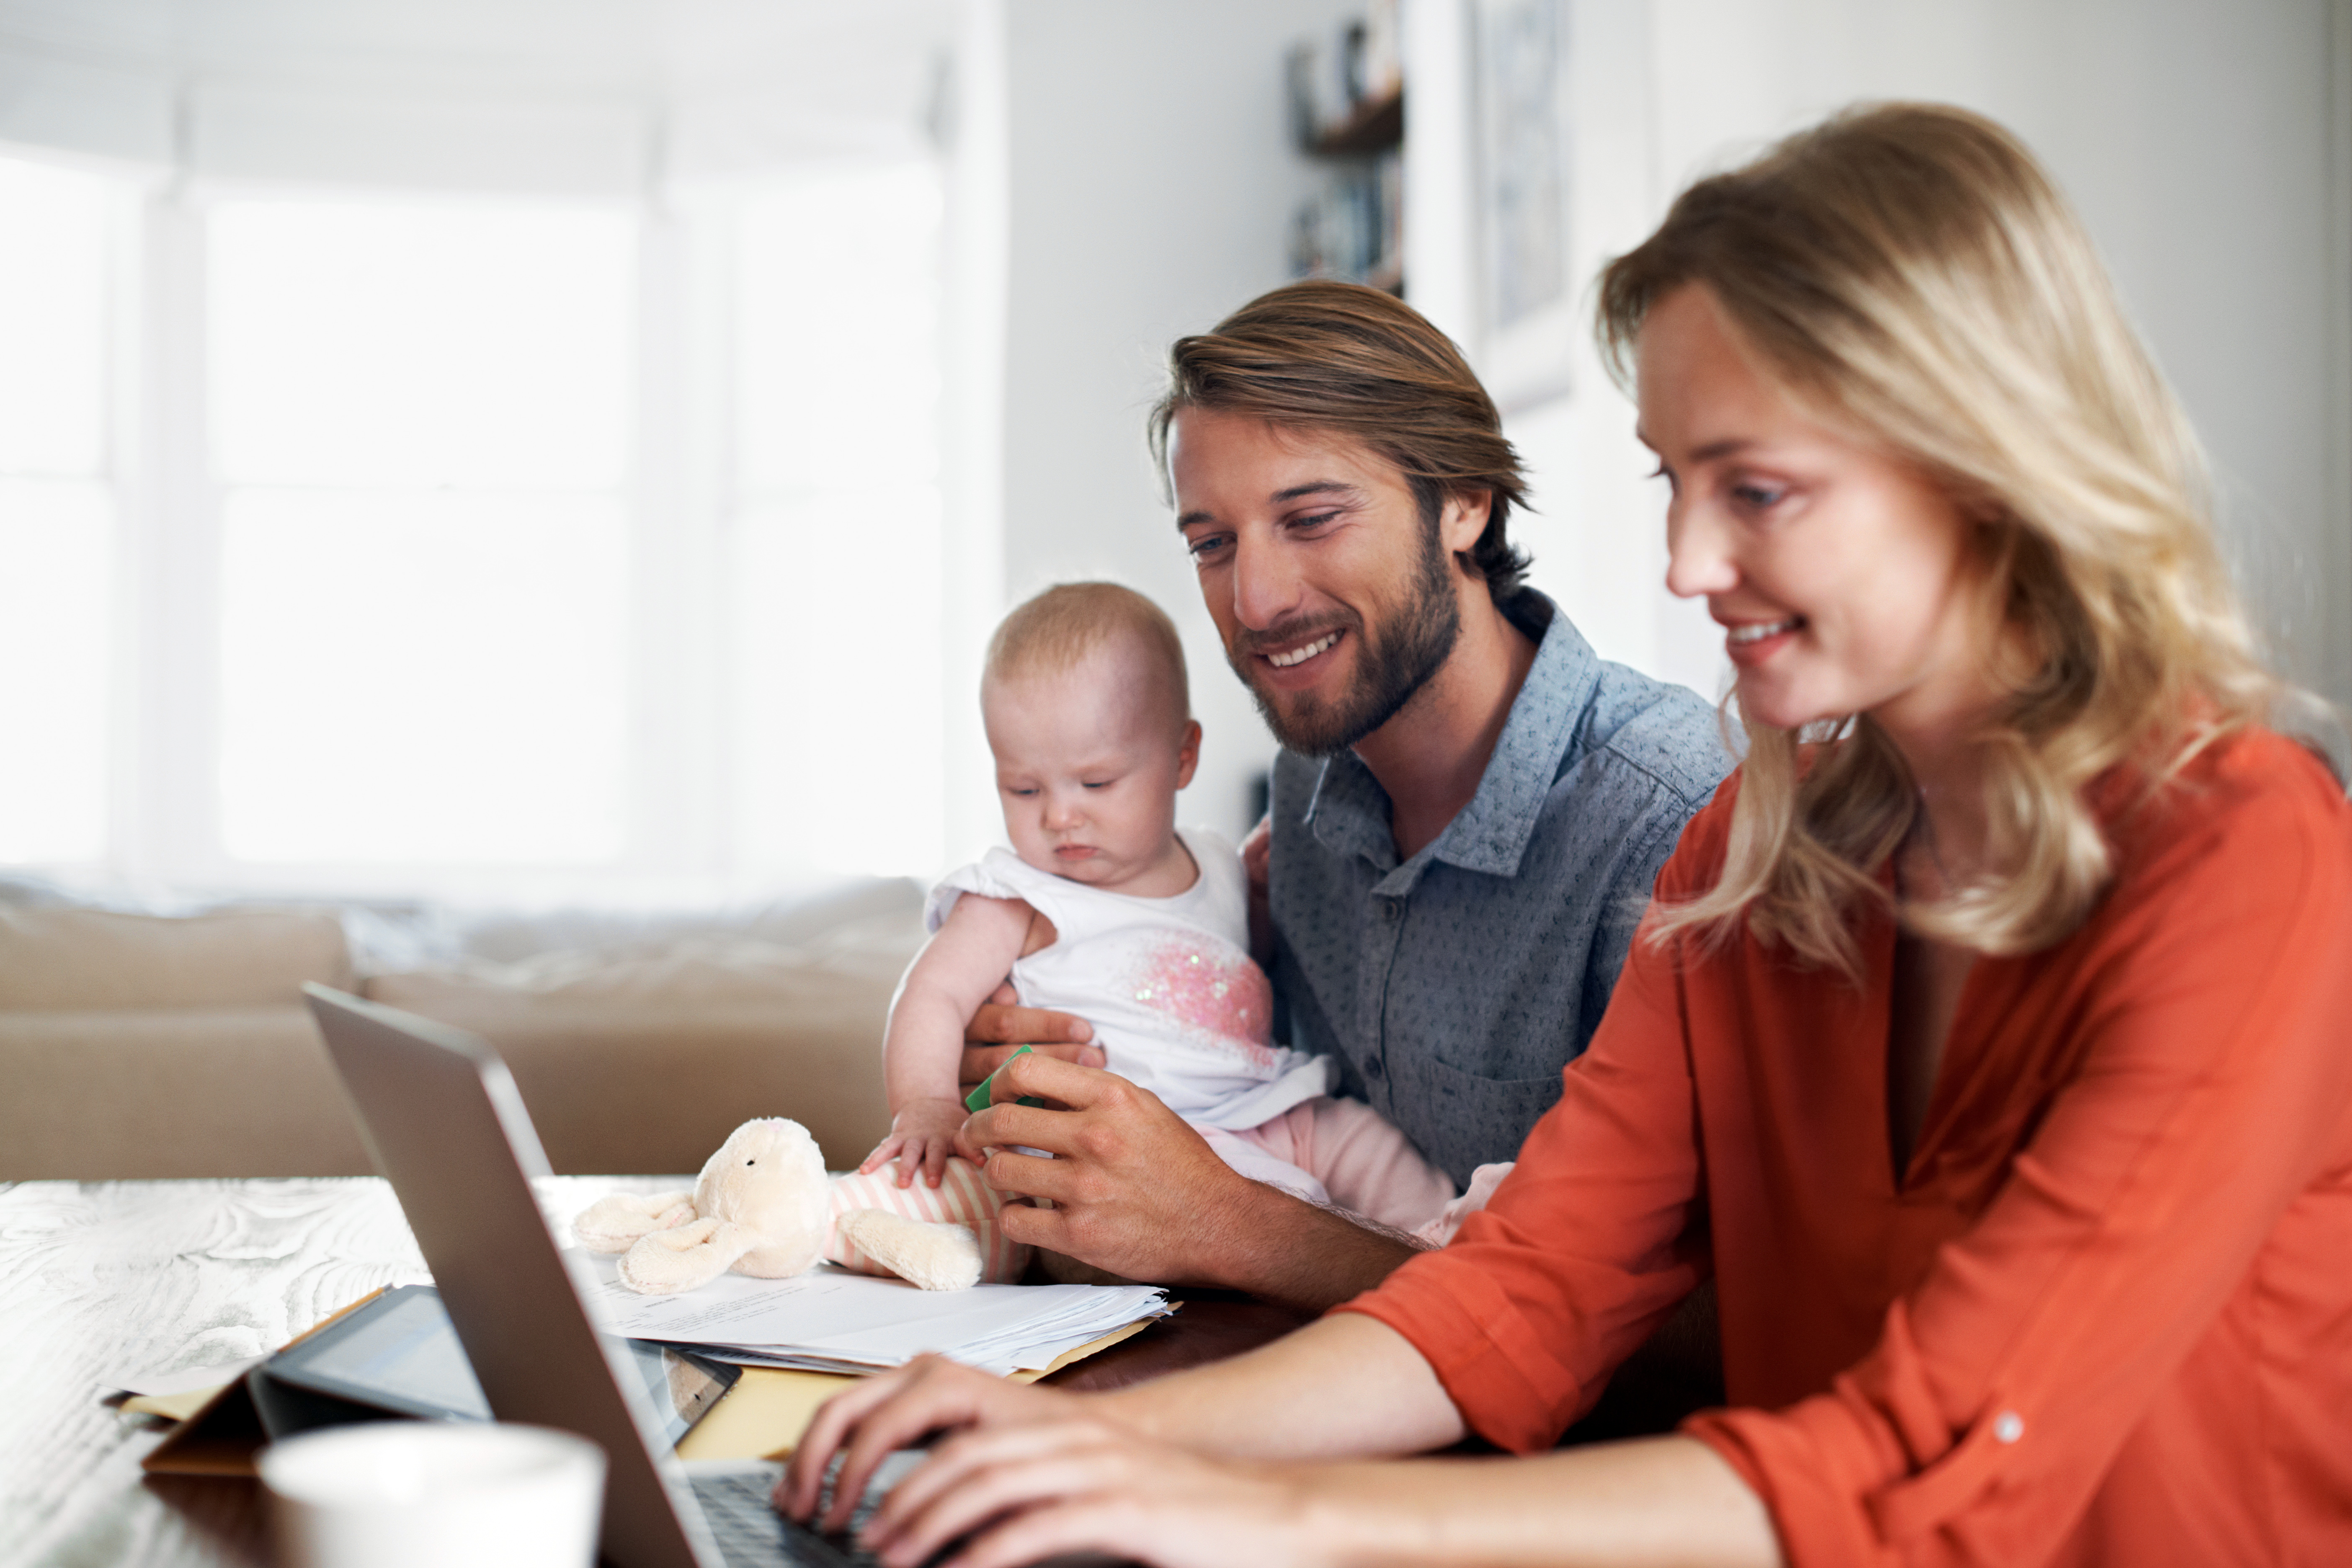 ElterngeldDigital has been providing parents in Berlin and Saxony with electronic help in applying for parental allowance since October 2018